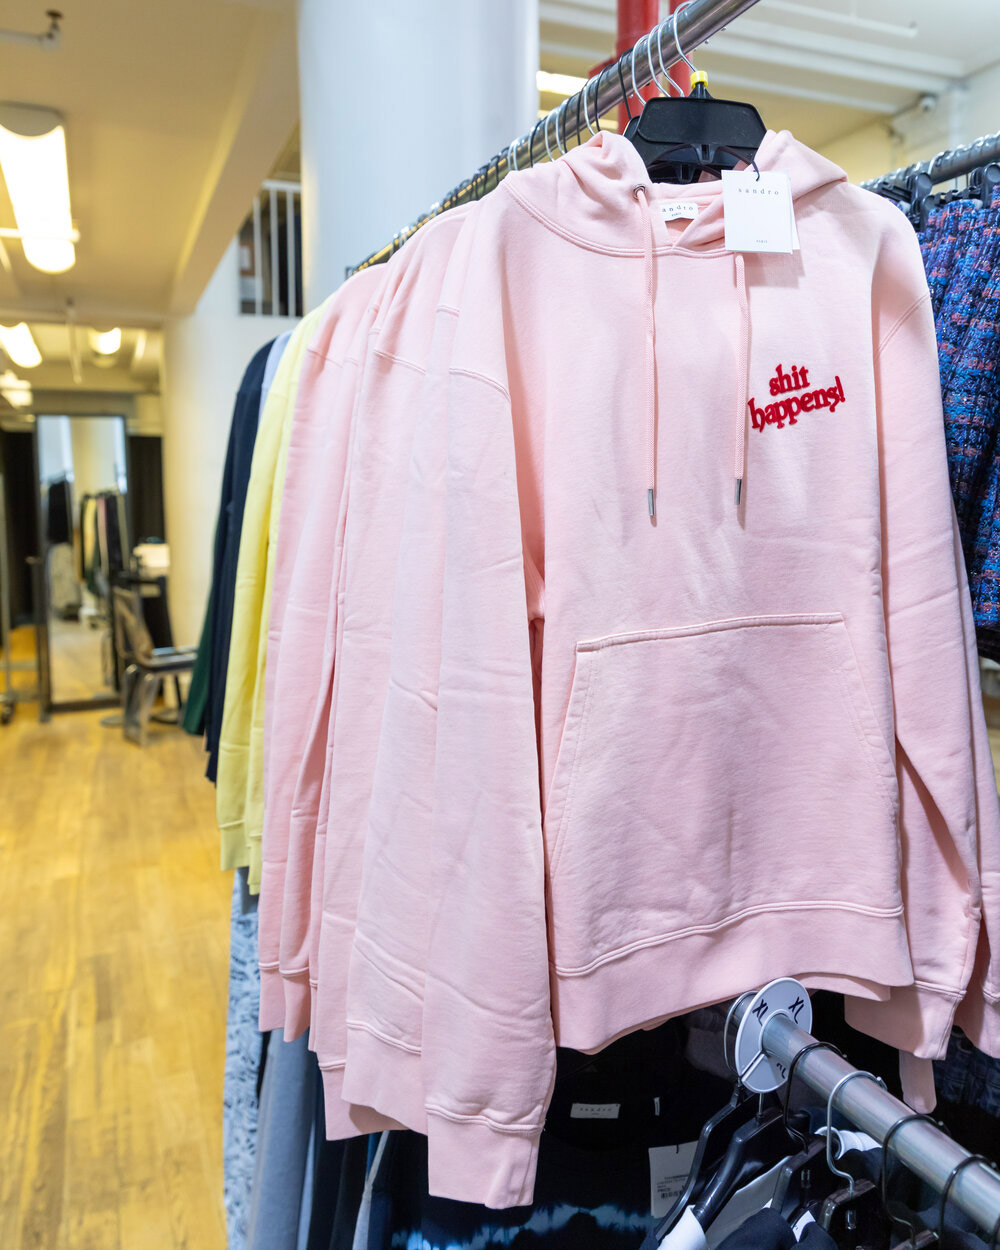 Sandro Apparel & Accessories New York Sample Sale in Images